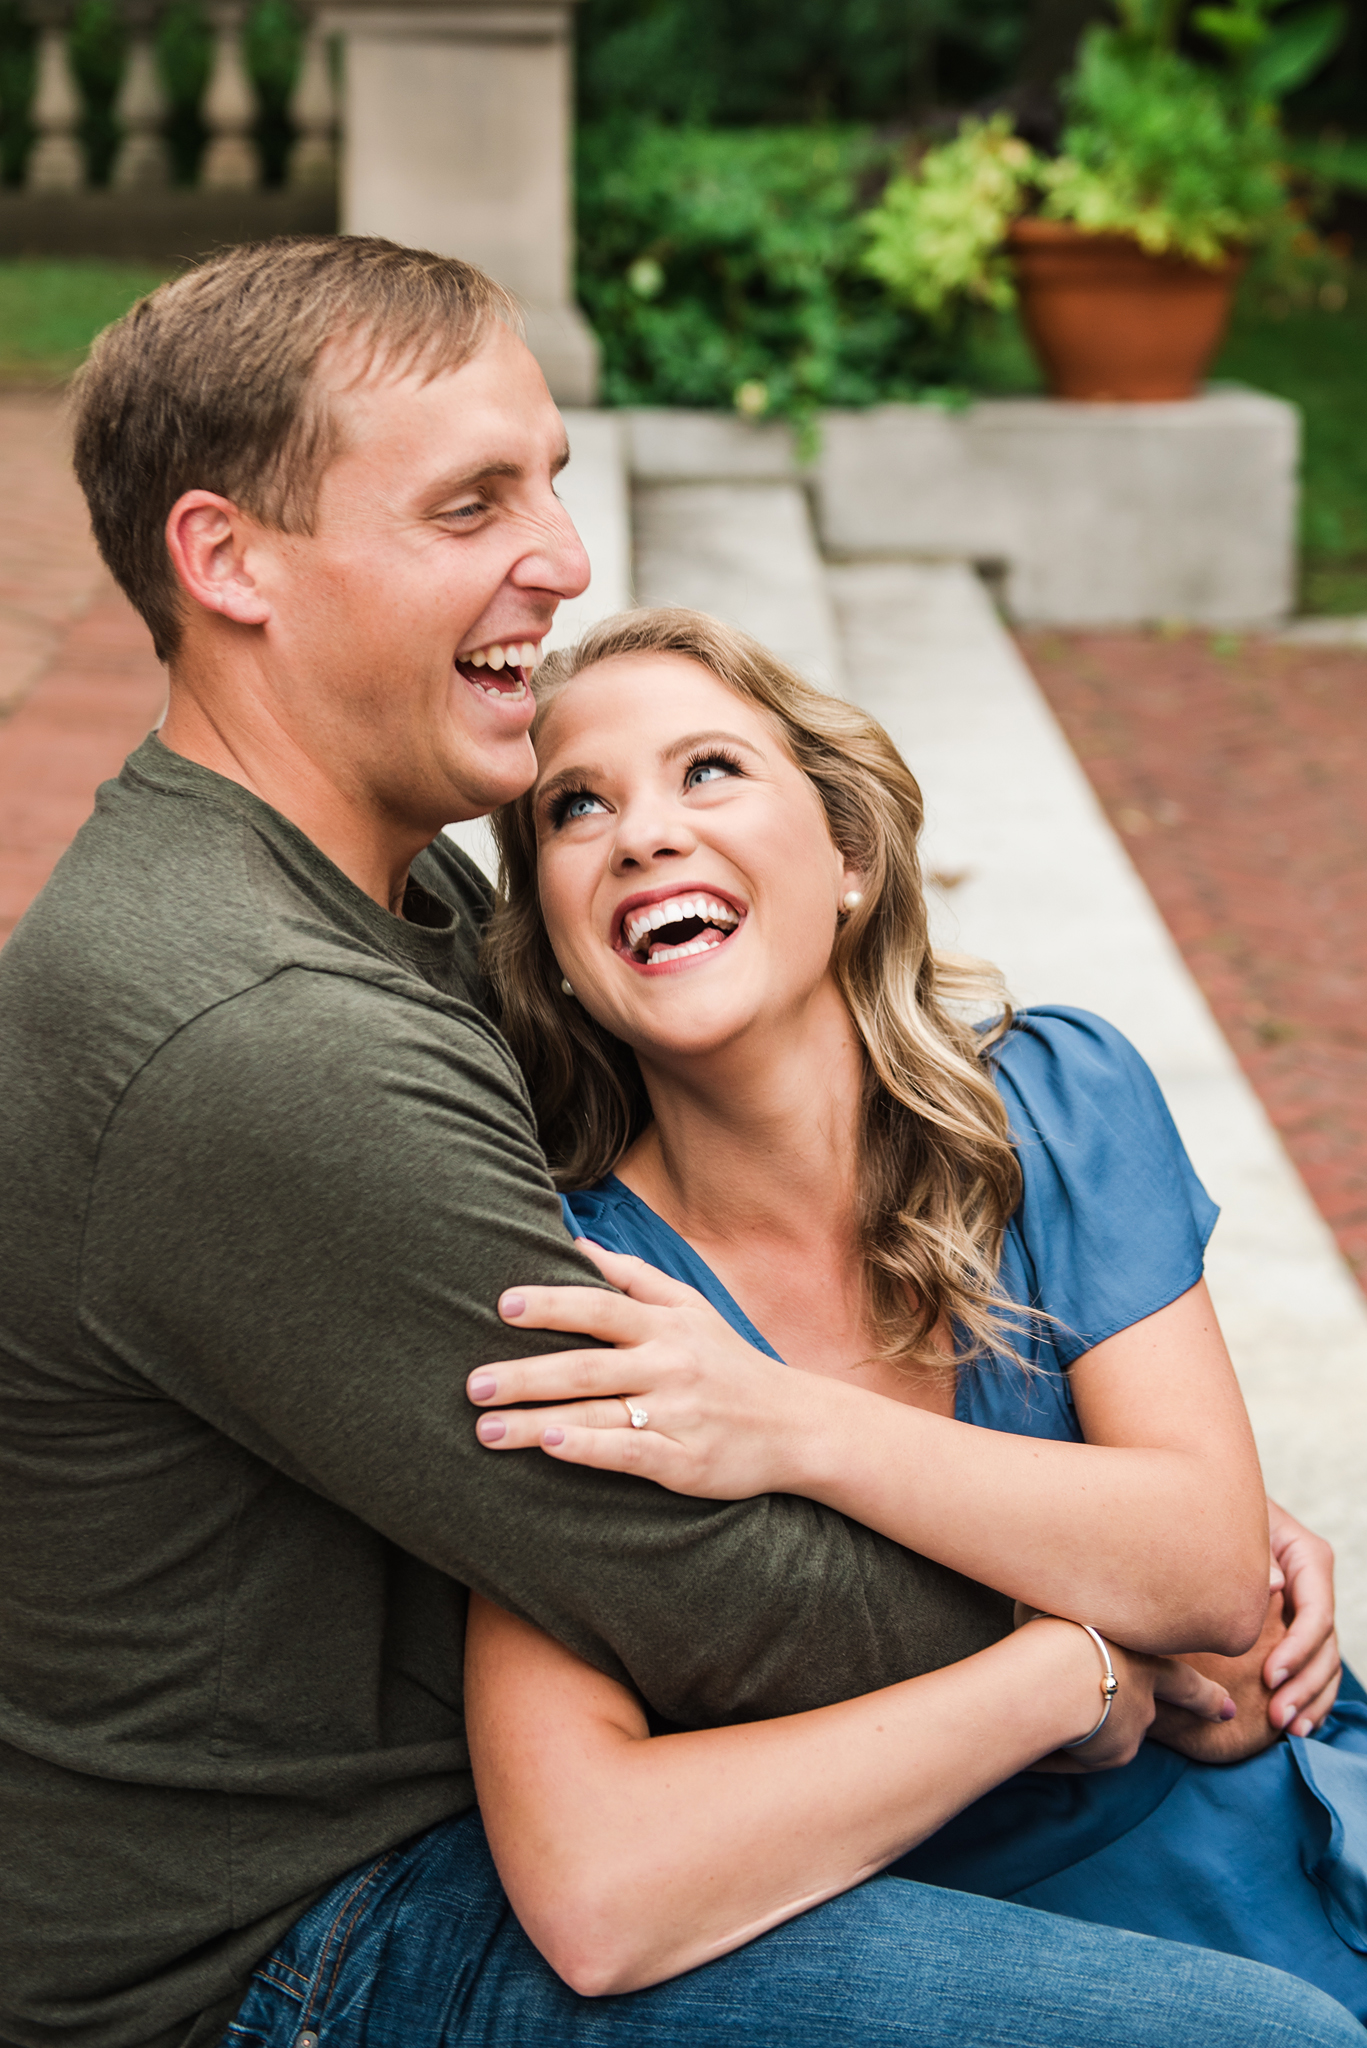 George_Eastman_House_Rochester_Yacht_Club_Rochester_Engagement_Session_JILL_STUDIO_Rochester_NY_Photographer_DSC_8040.jpg